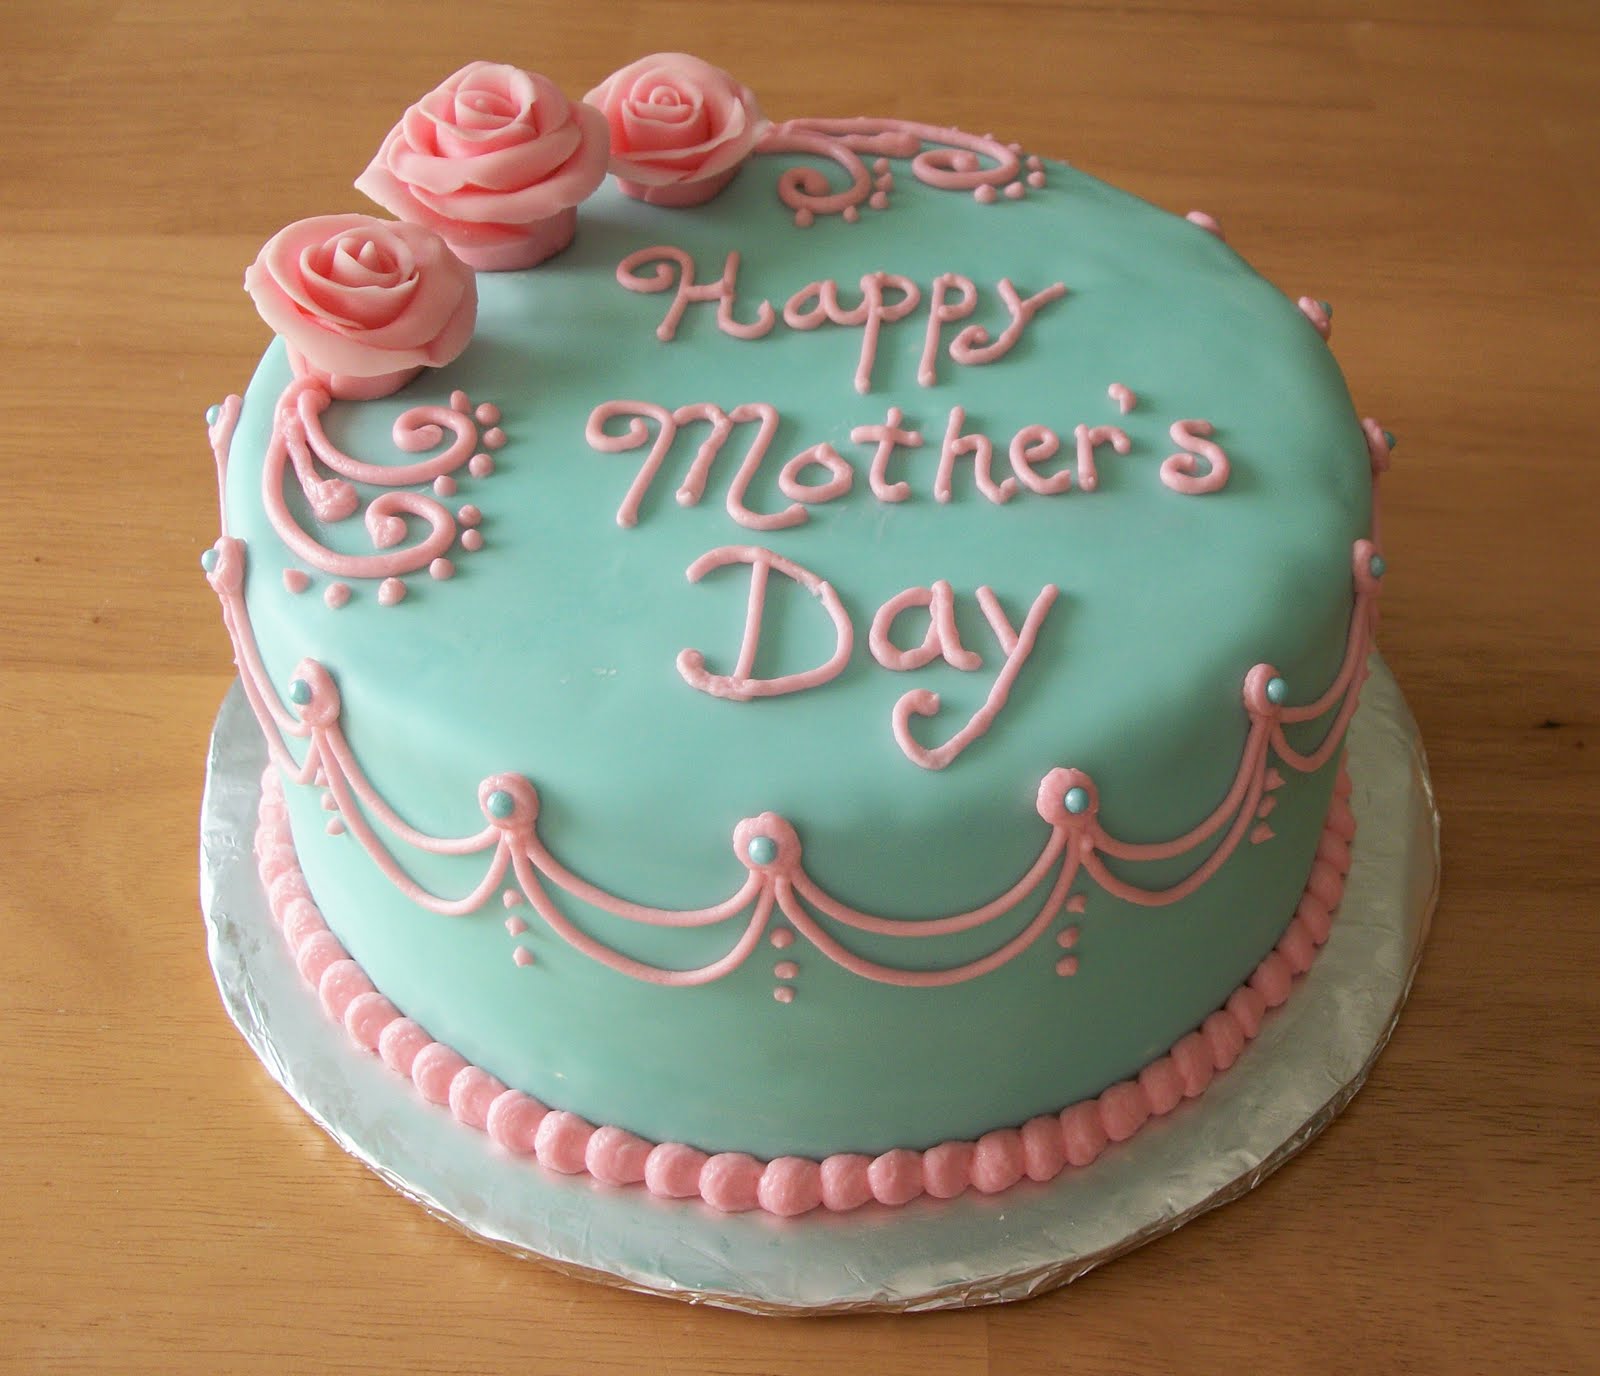 8 Photos of Mother's Day Cakes Cake Boss